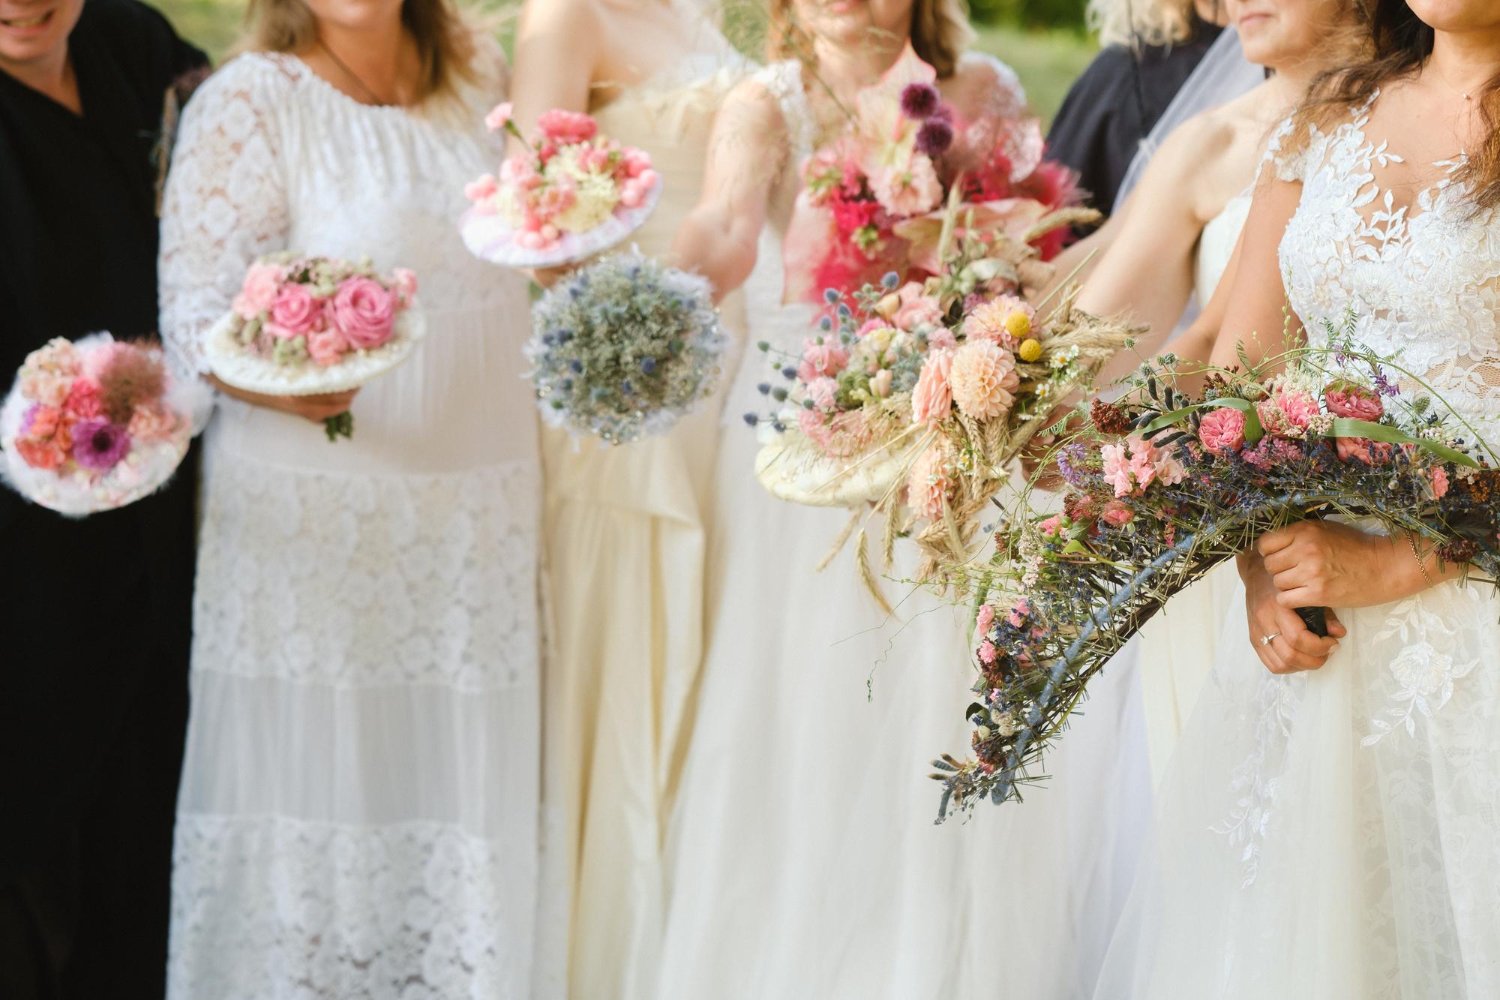  many brides hold their wedding bouquet in their hands